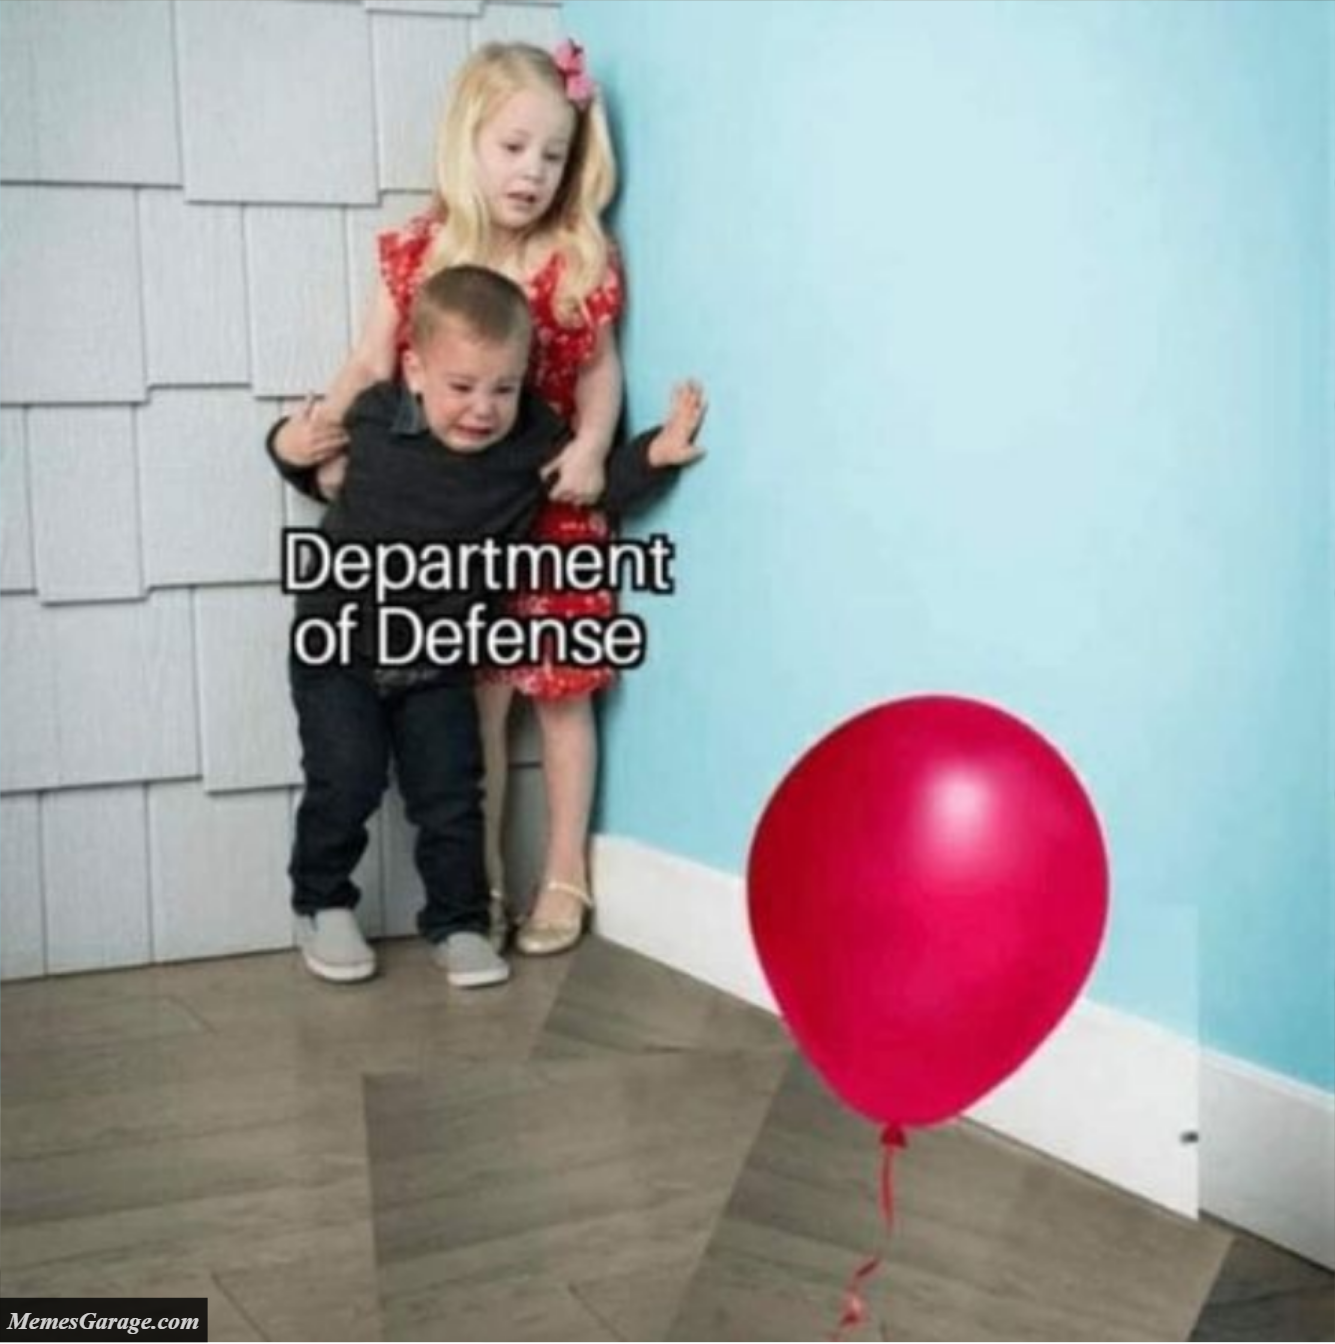 United States Department Of Defense Vs A Balloon